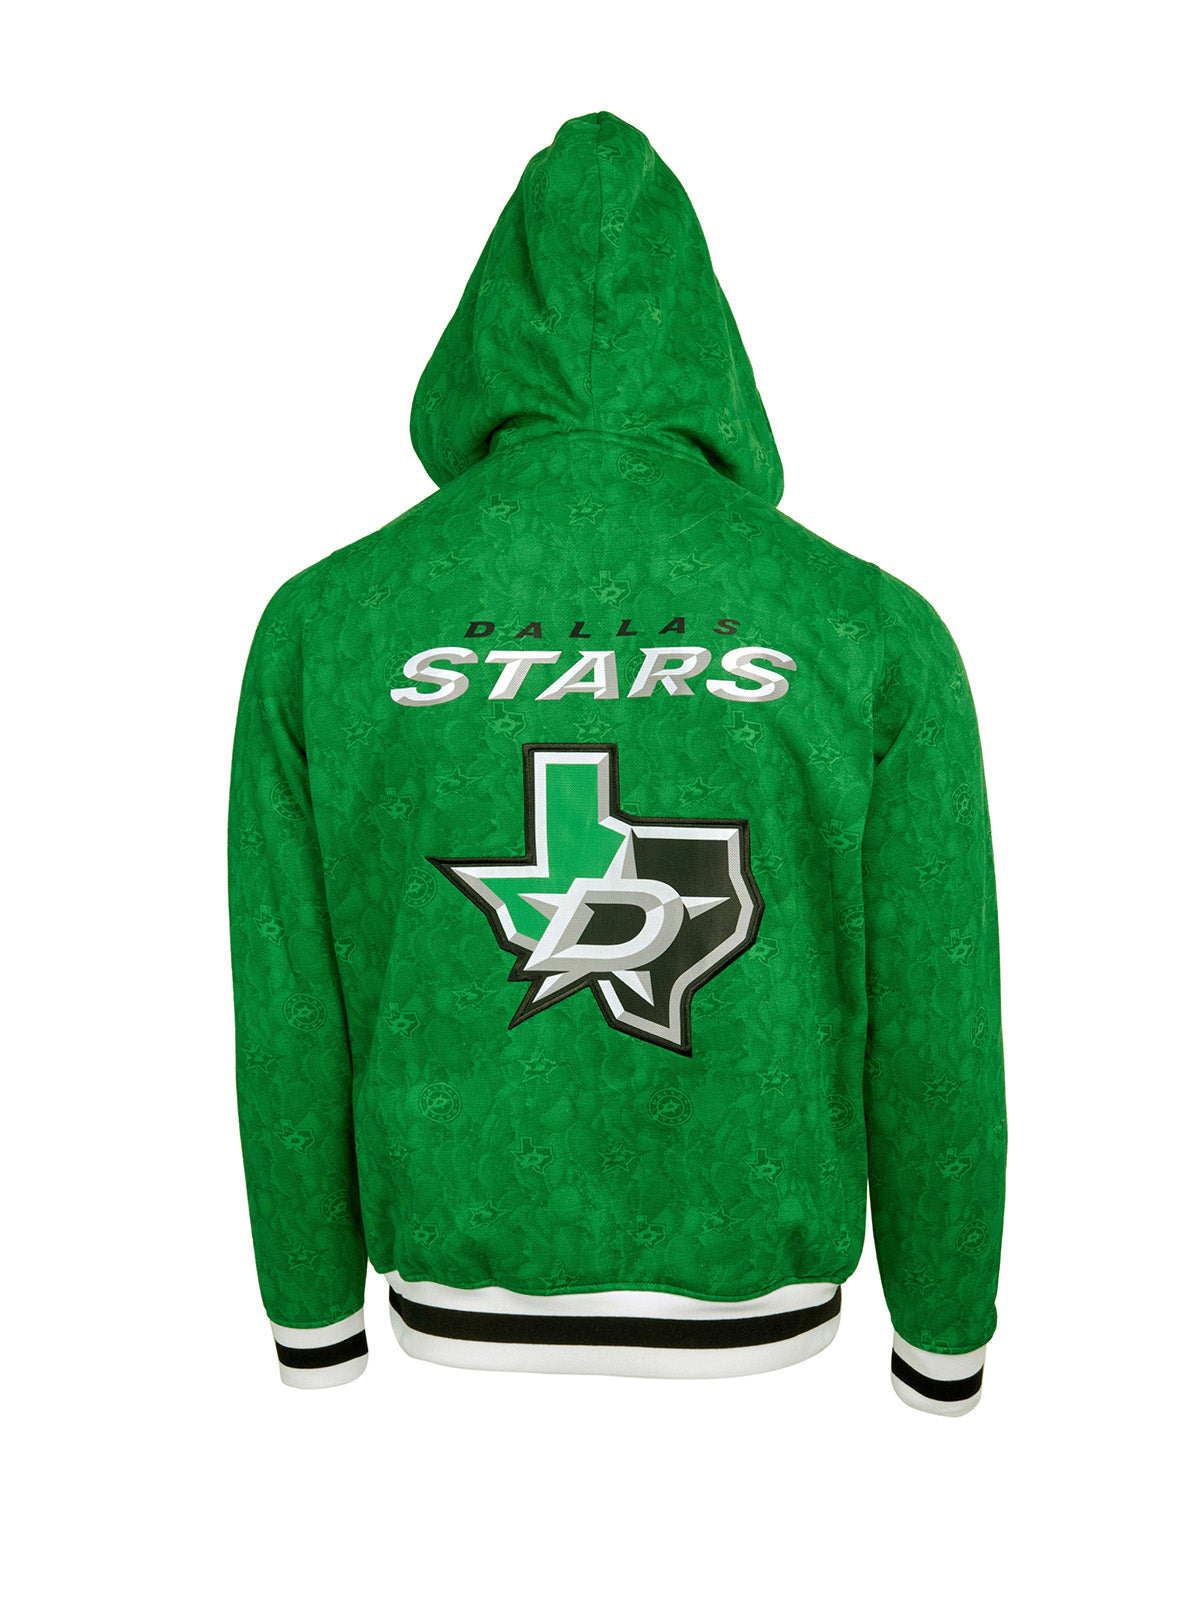 Dallas Stars Hoodie - Show your team spirit, with the iconic team logo patch centered on the back, and proudly display your Dallas Stars support in their team colors with this NHL hockey hoodie.